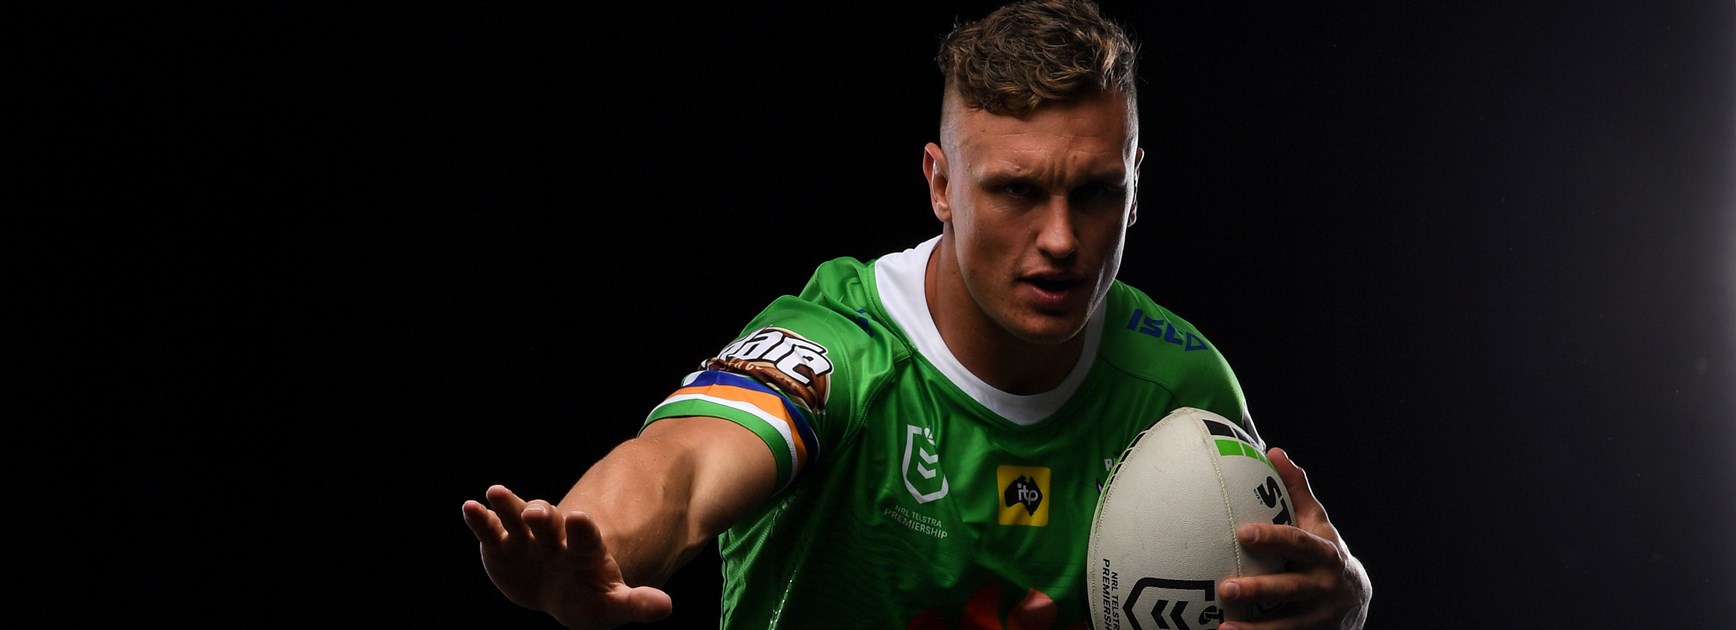 Deal of a lifetime: Wighton joins Raiders royalty